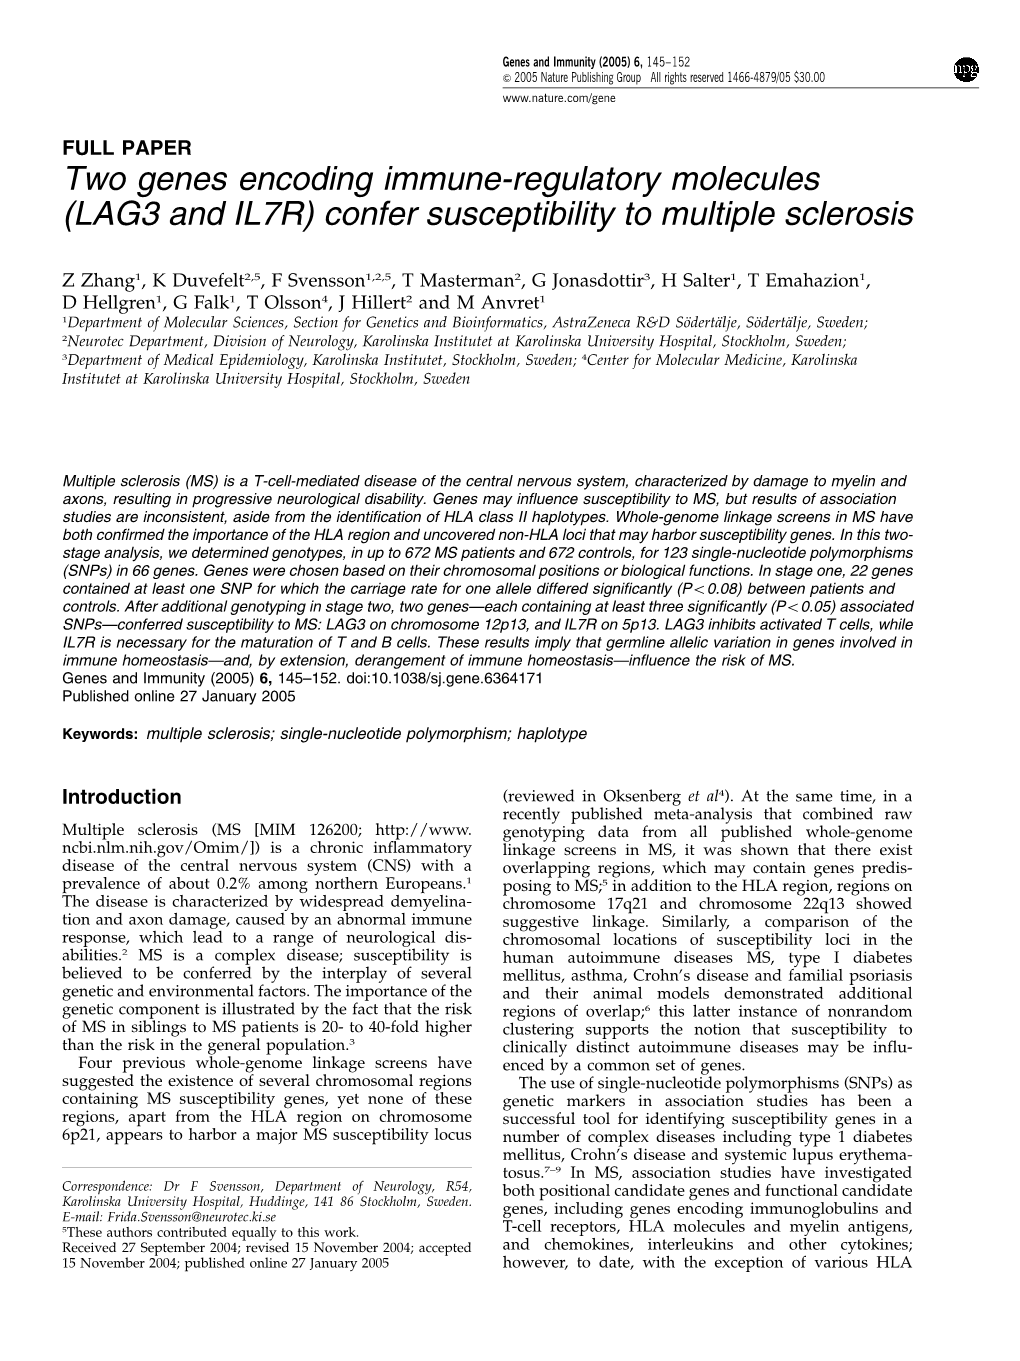 (LAG3 and IL7R) Confer Susceptibility to Multiple Sclerosis